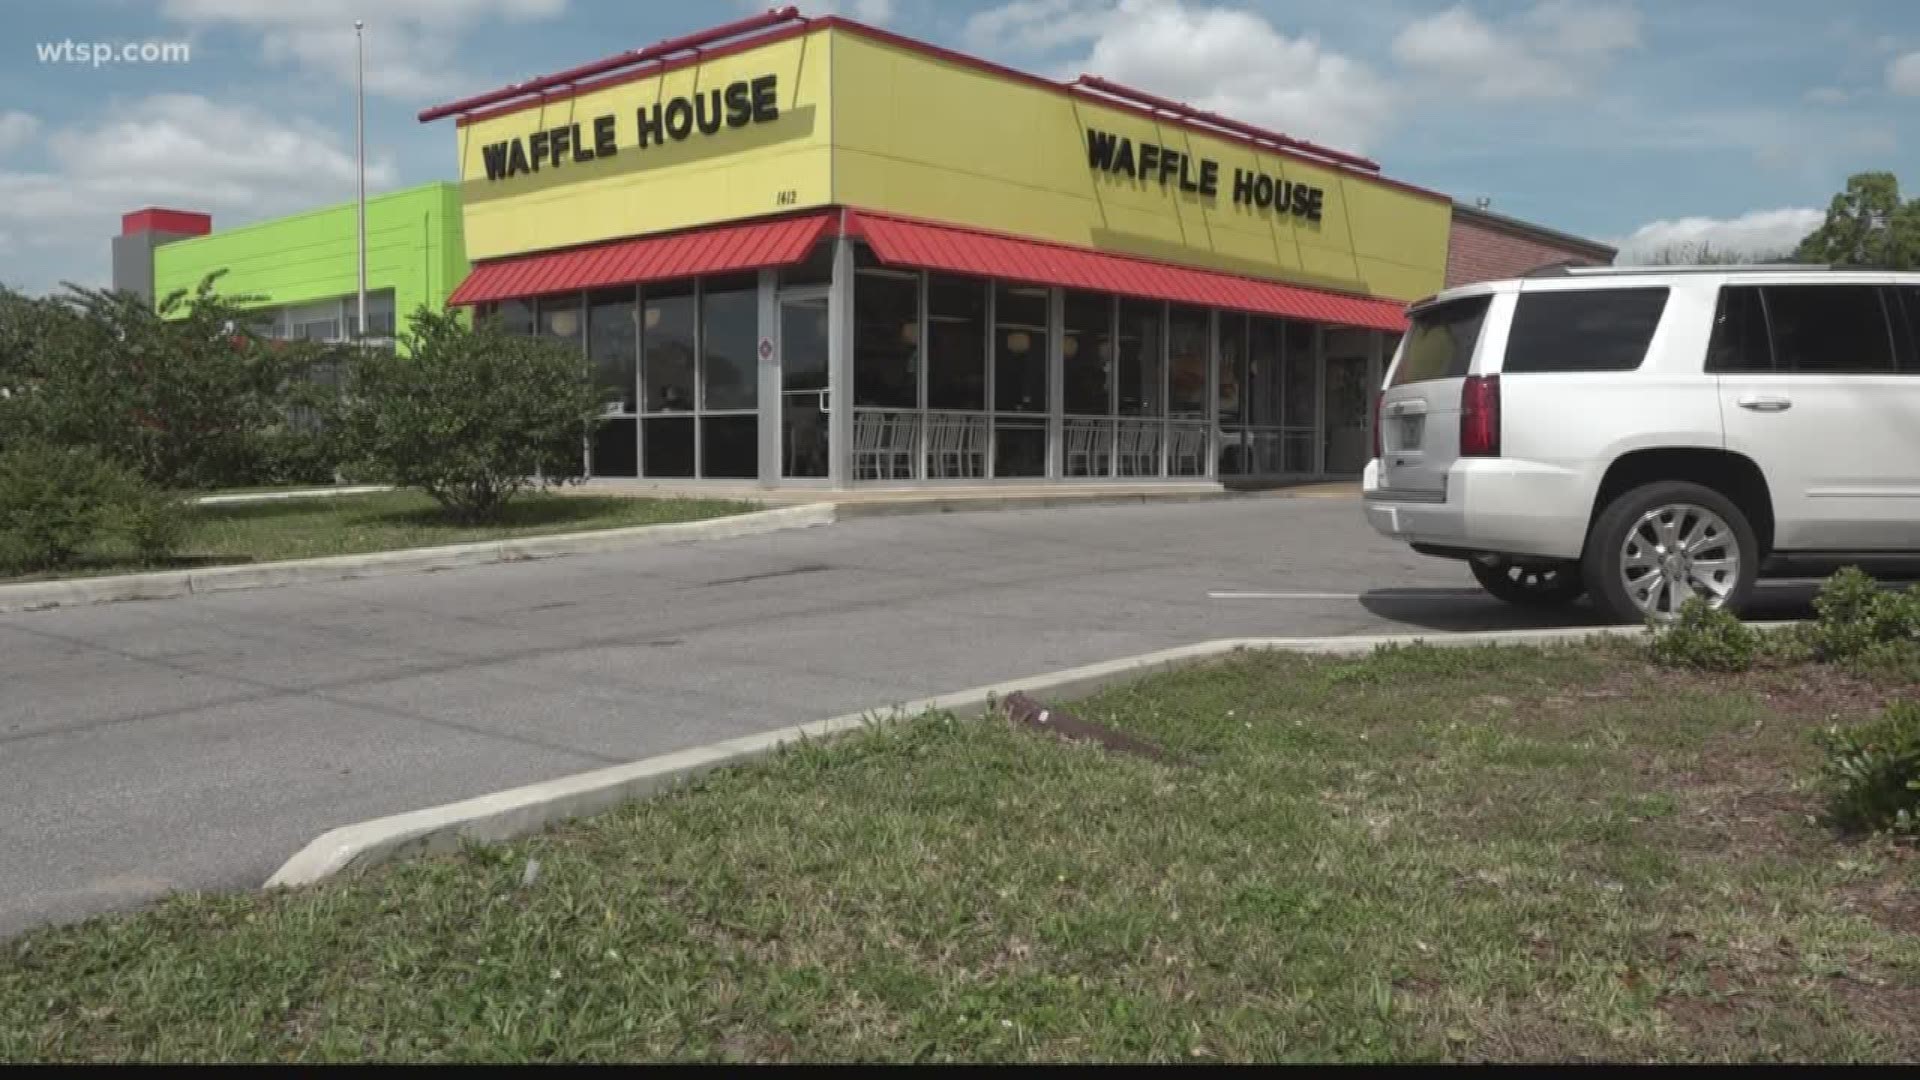 A tragic accident Wednesday night left a toddler dead after his father accidentally ran him over at a Brandon Waffle House.